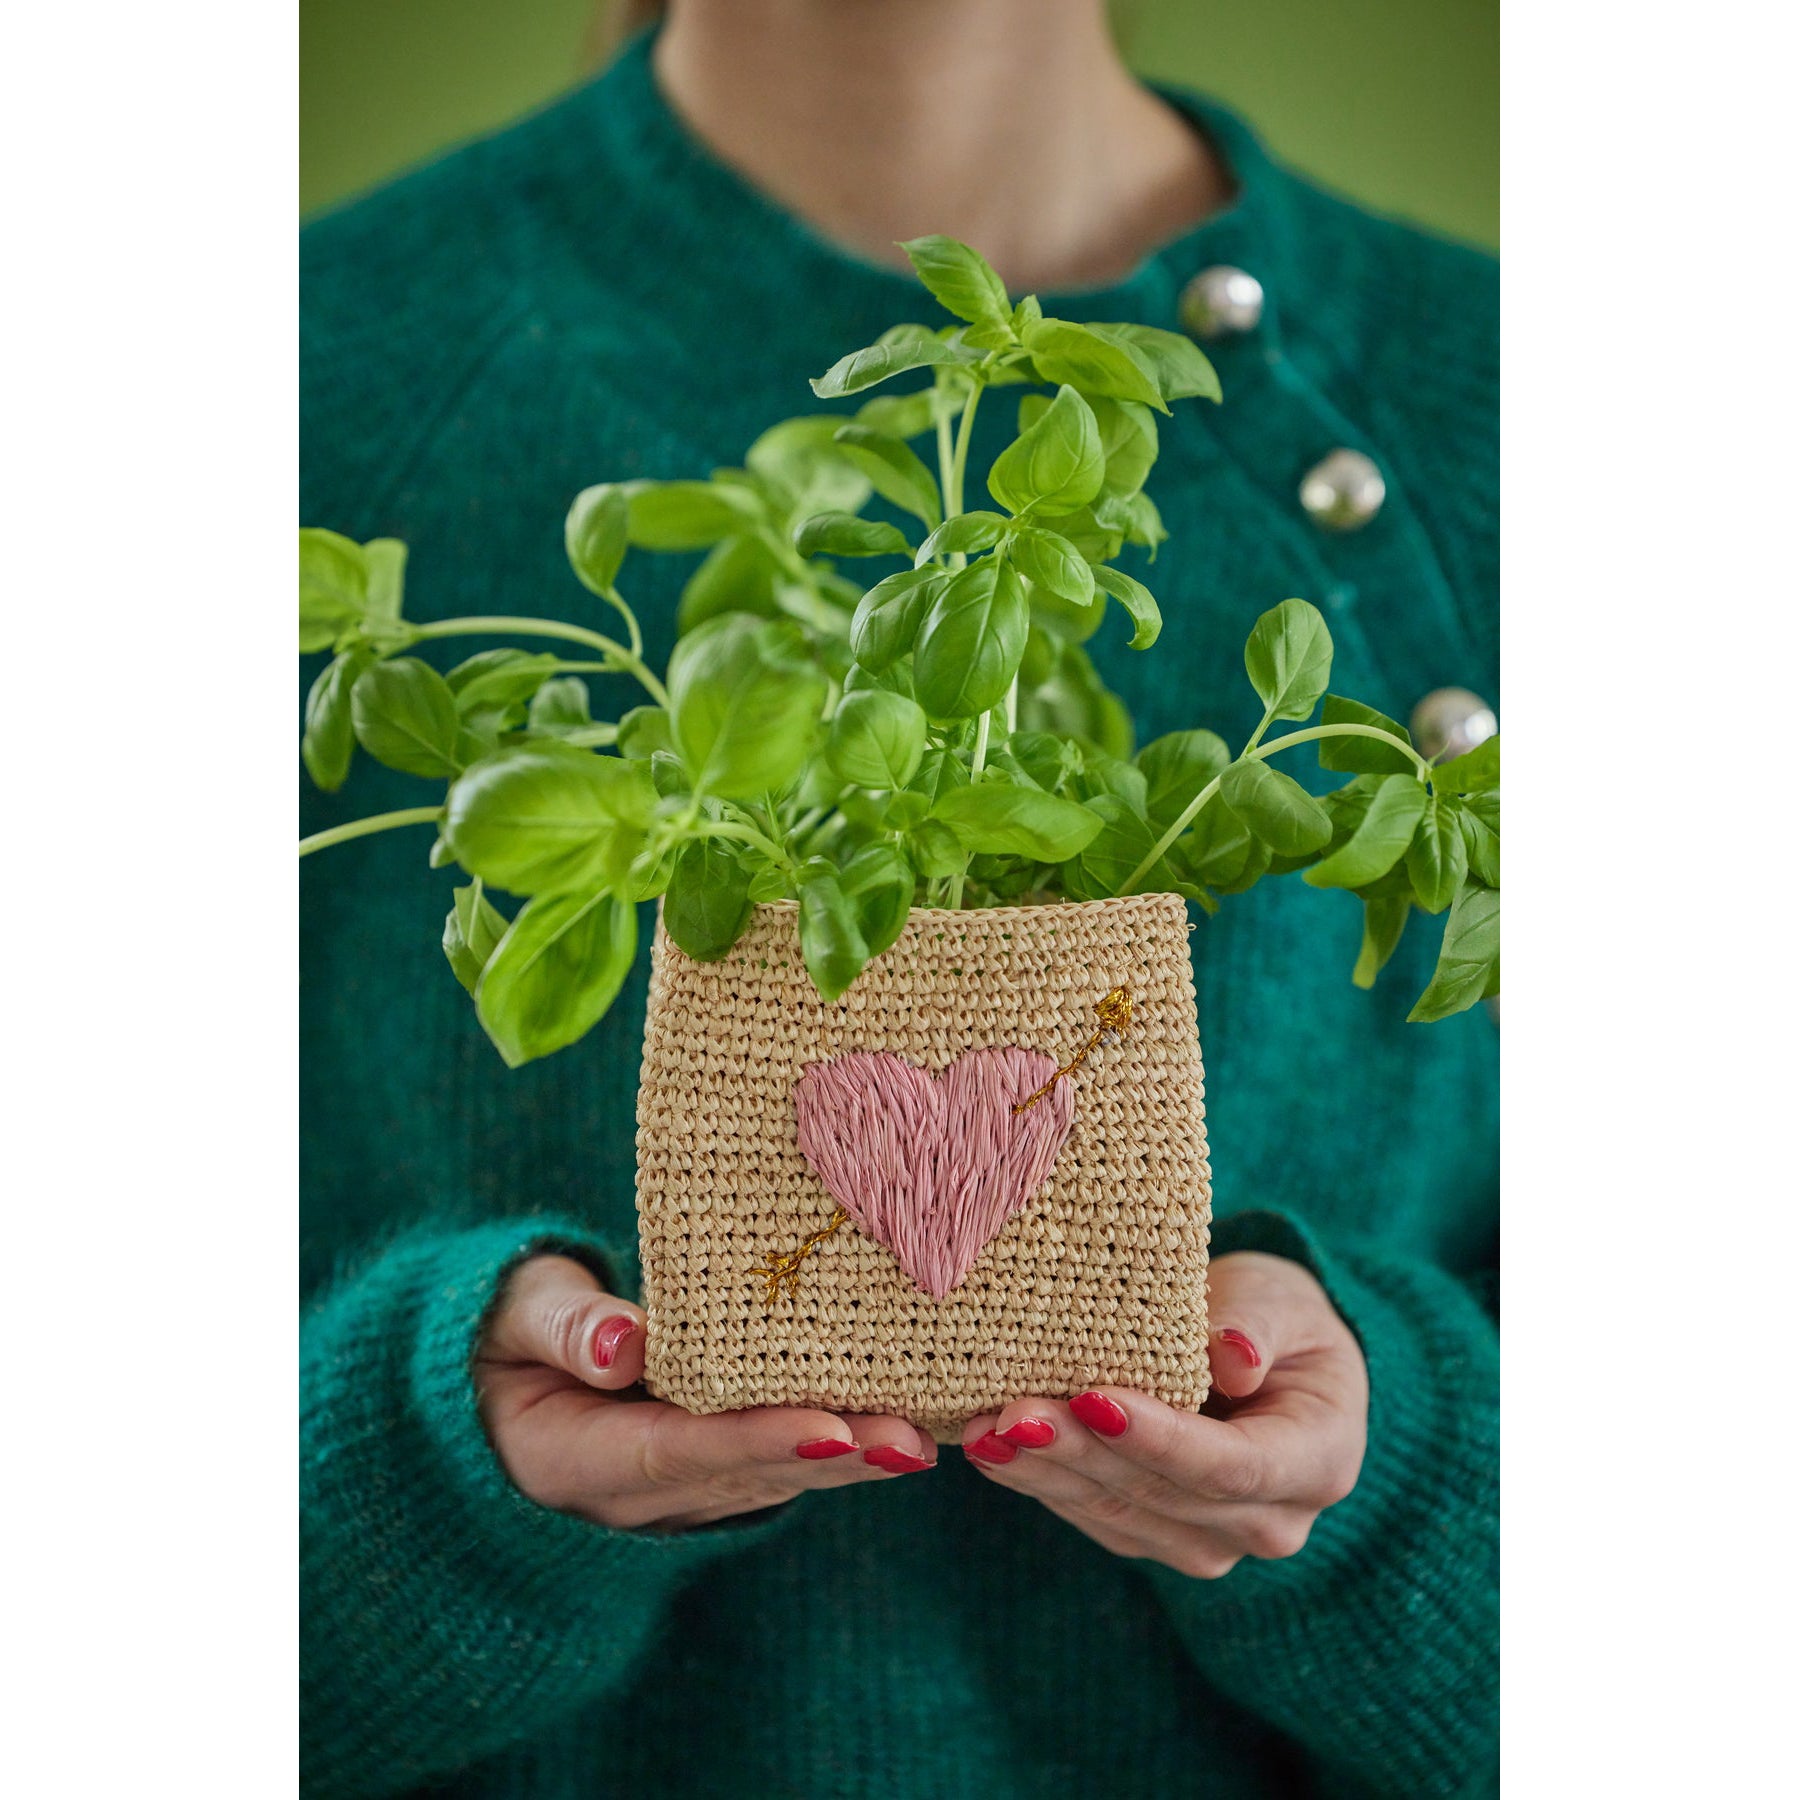 rice-dk-small-square-raffia-storage-basket-natural-pink-heart-embroidery-rice-bssto-2zheais